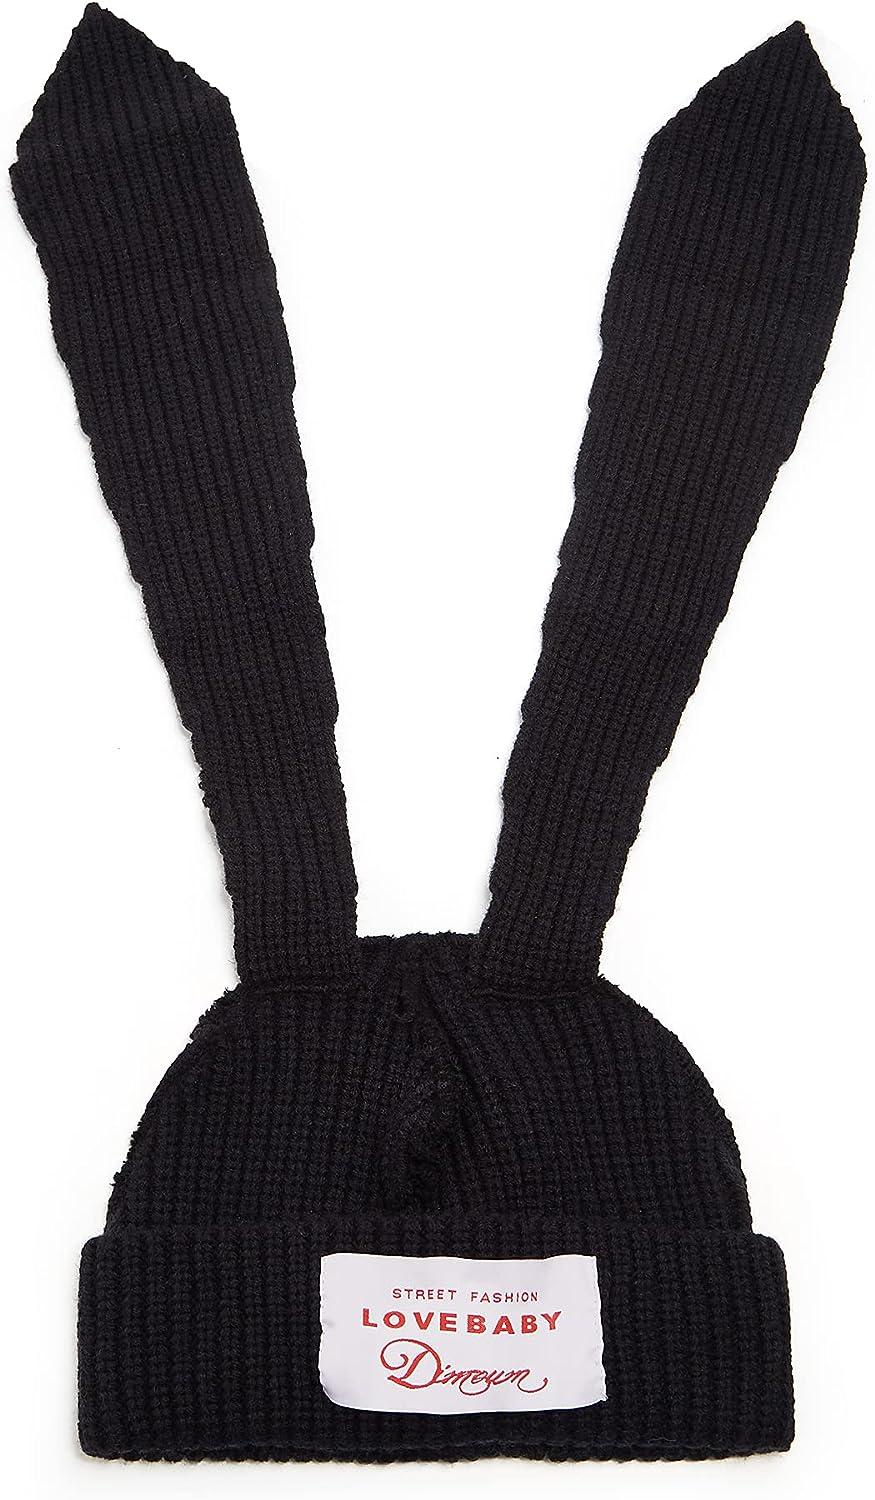 Beanie hat for Girls, Baby Toddler Kids Boy Girl Knitted Crochet Rabbit Ear  Beanie Winter Warm Hat Cap Black: Clothing, Shoes & Jewelry 